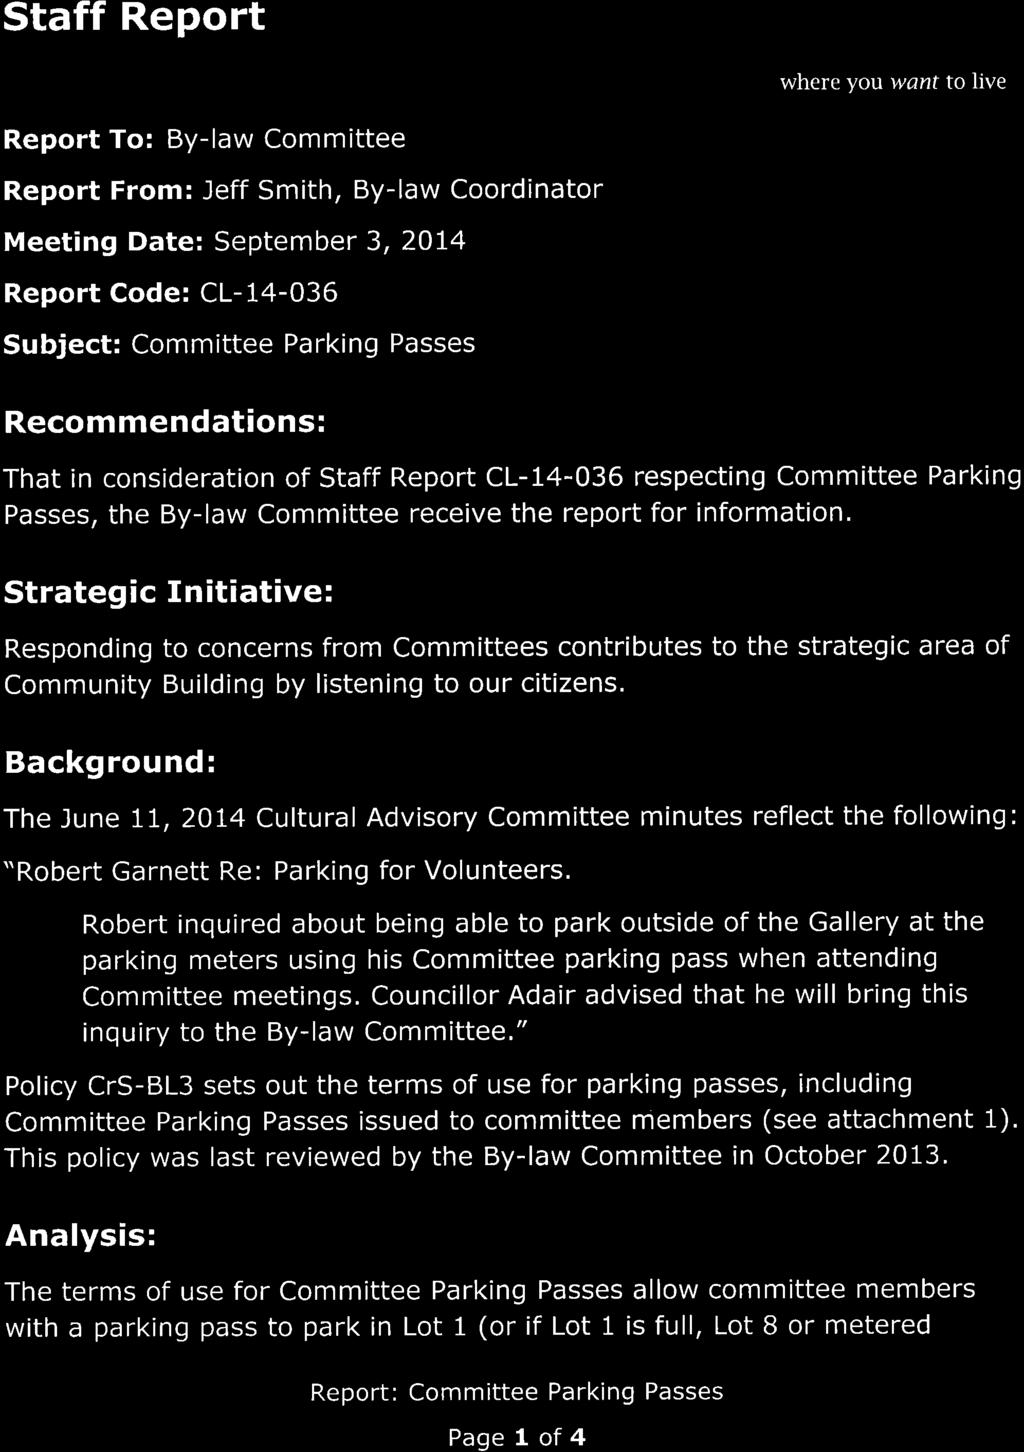 Staff Report where yoû want to live Report To: By-law Committee Report From: Jeff Smith, By-law Coordinator Meeting Date: September 3, 2OI4 Report Code: CL-14-036 Subject: Committee Parking Passes